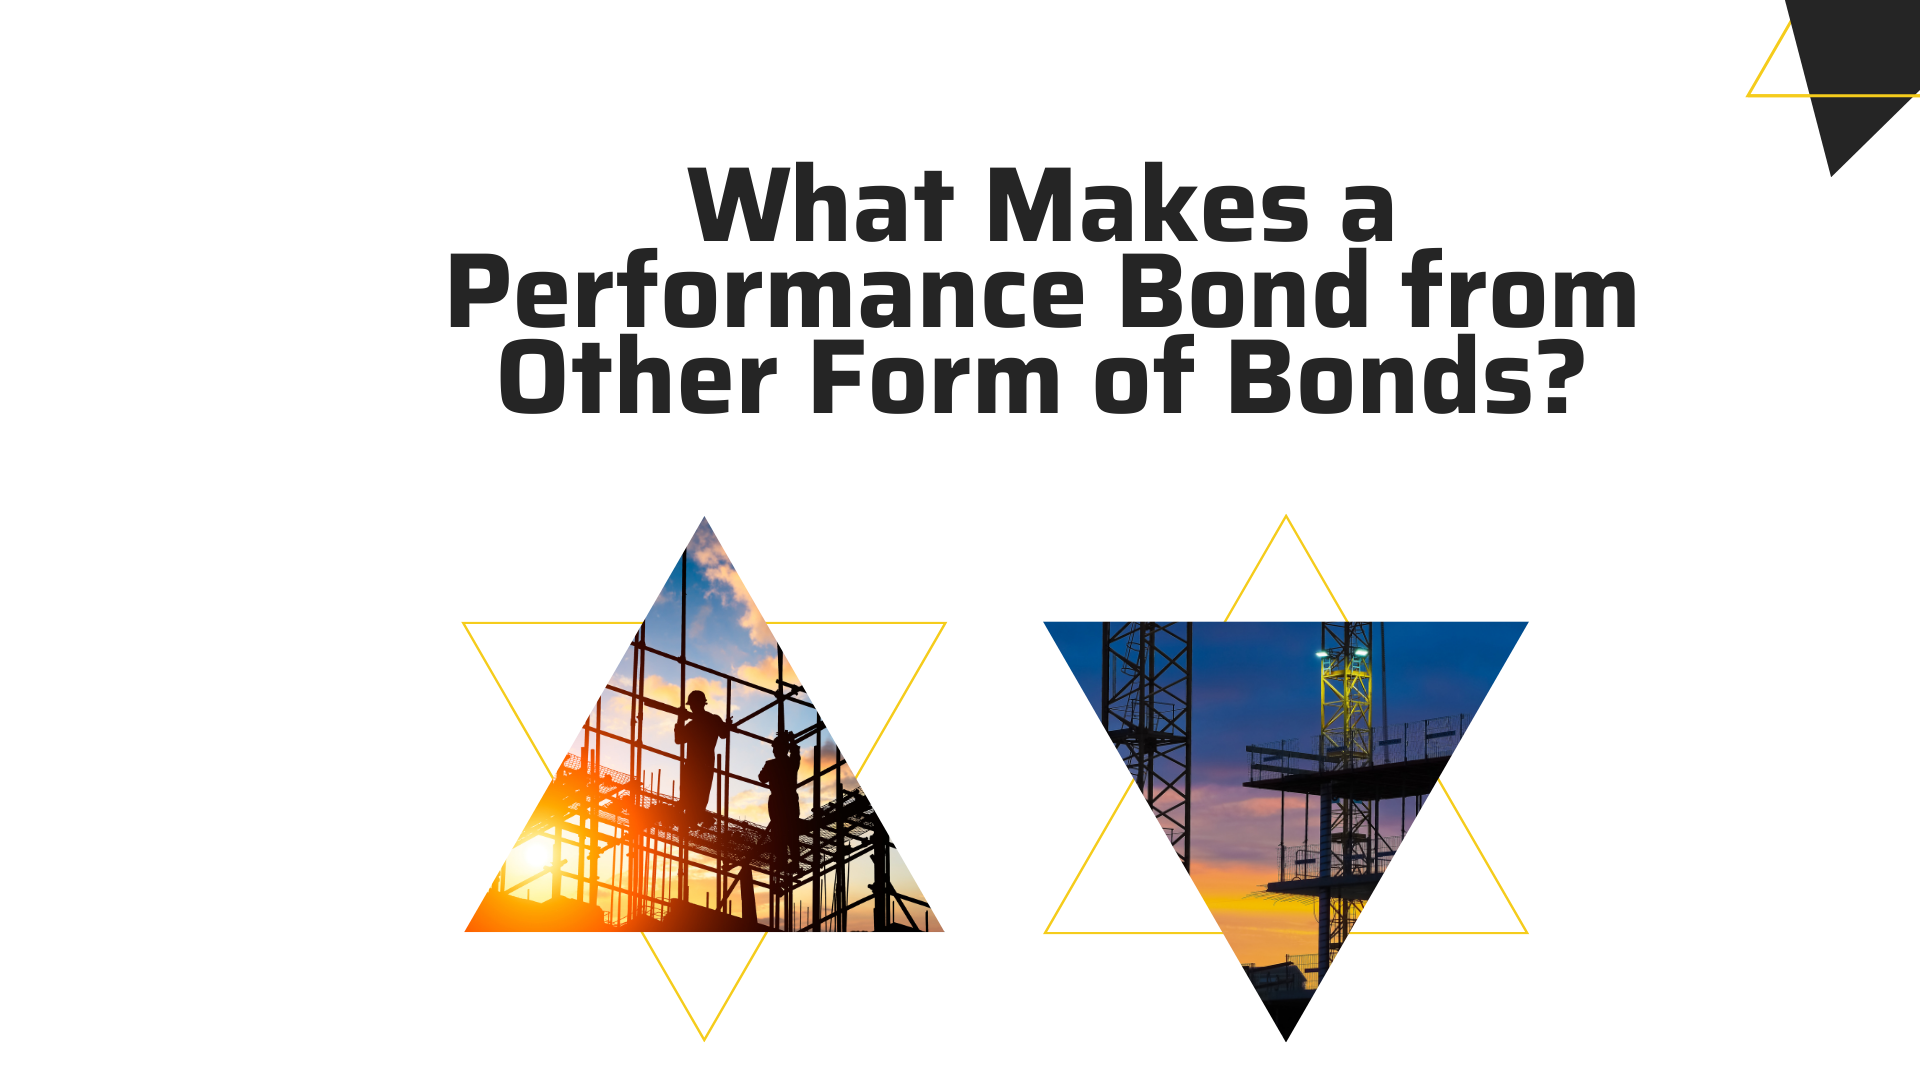 performance bond - What is the definition of a surety bond - buildings in triangle shaped frame